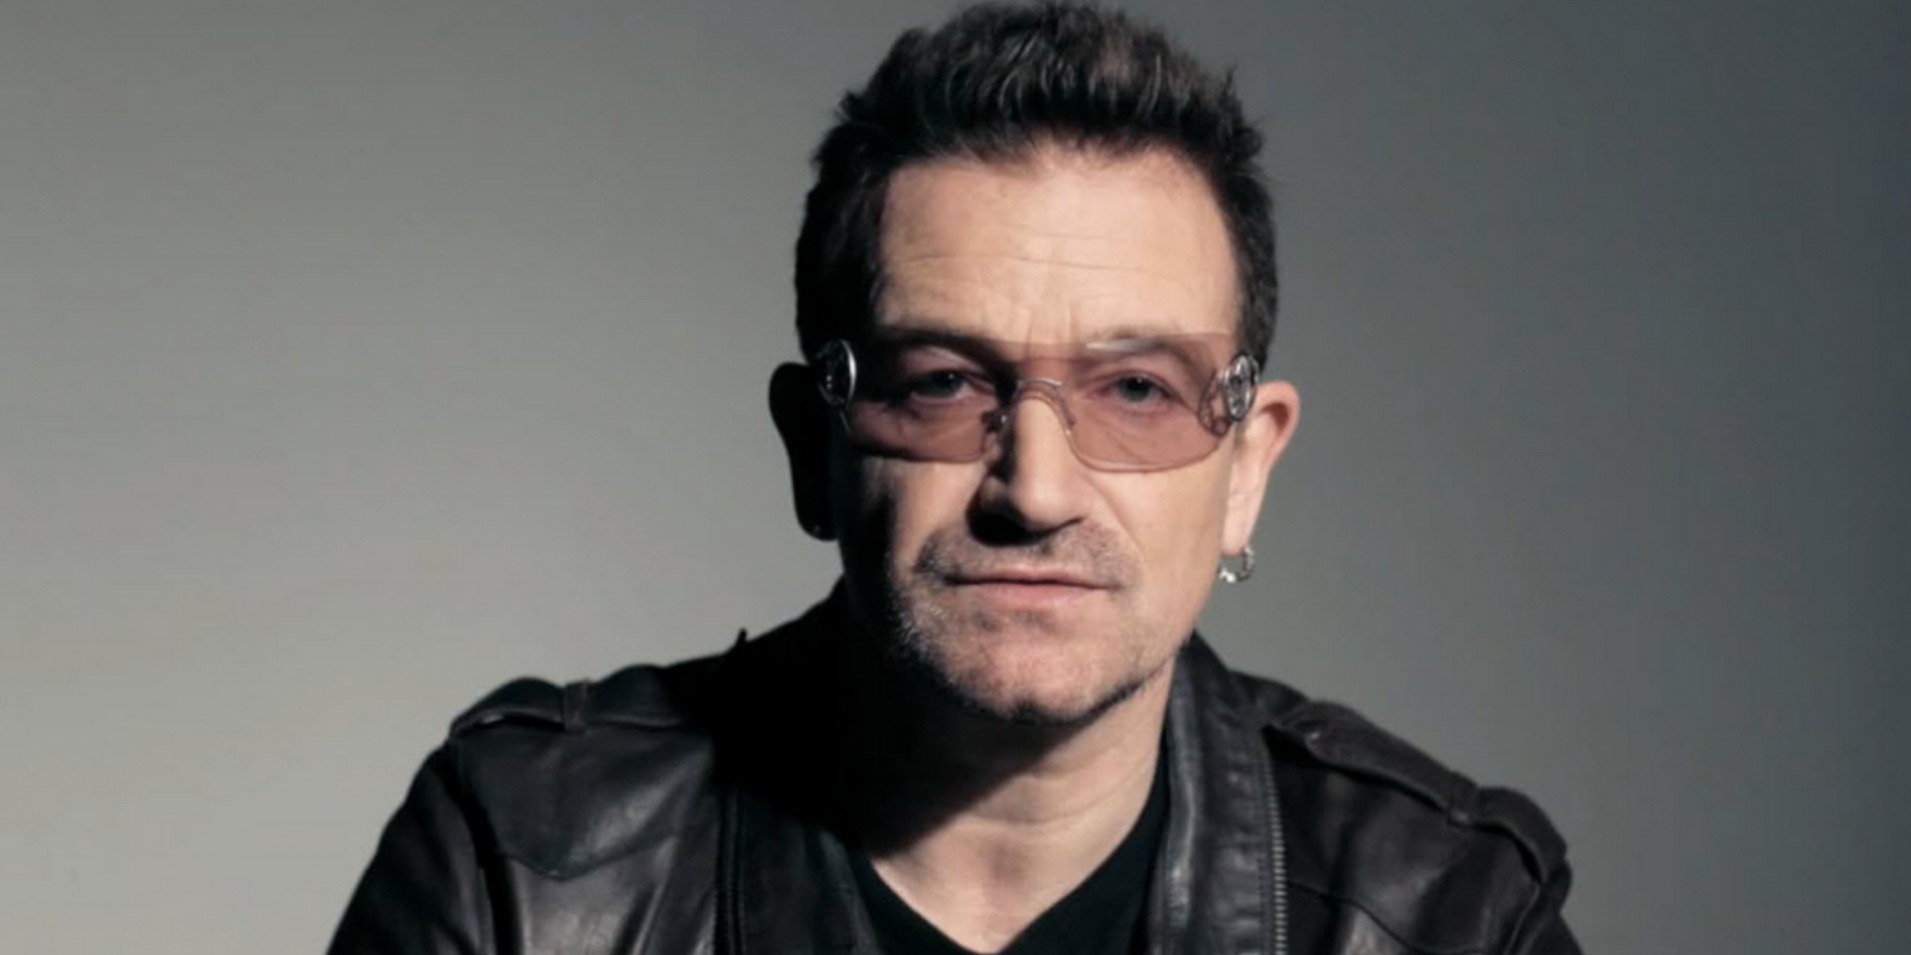 Bono teams up with Red Cross for first blood-by-drone delivery service in the Philippines